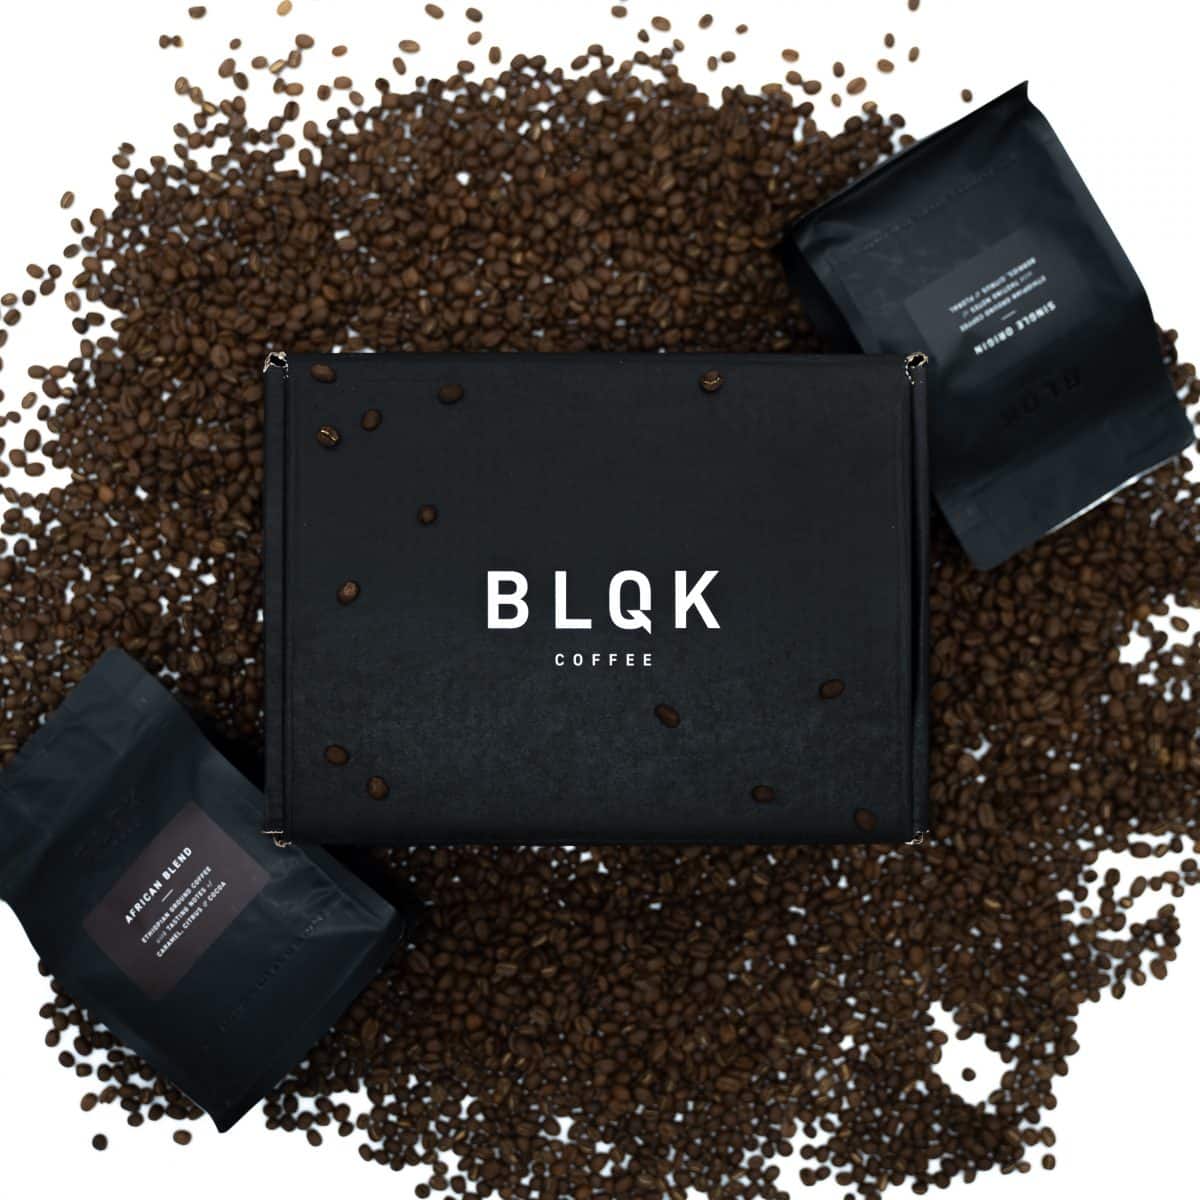 B L Q K Coffee beans and packages 